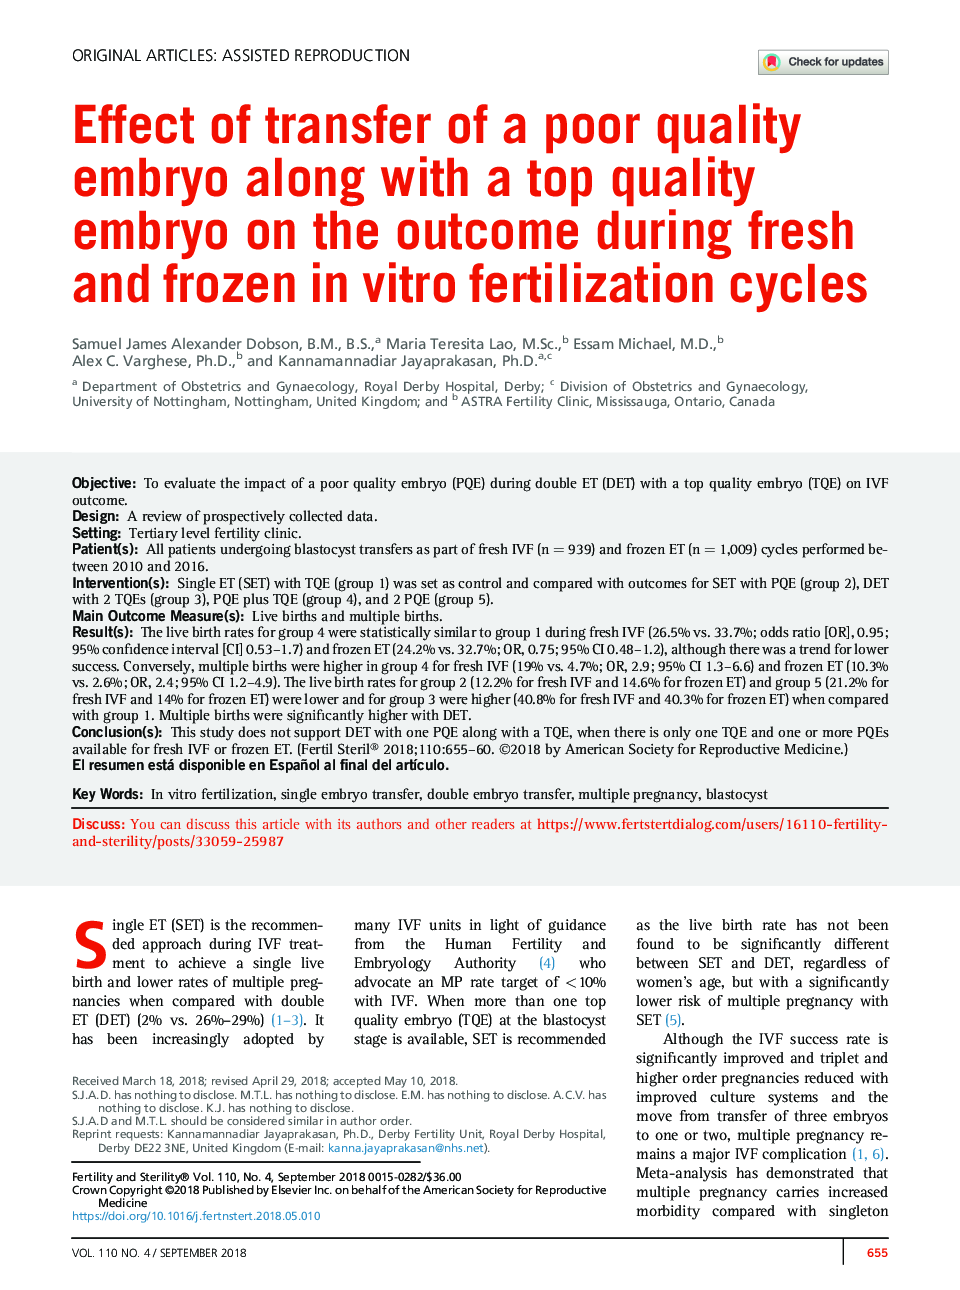 Effect of transfer of a poor quality embryo along with a top quality embryo on the outcome during fresh and frozen inÂ vitro fertilization cycles